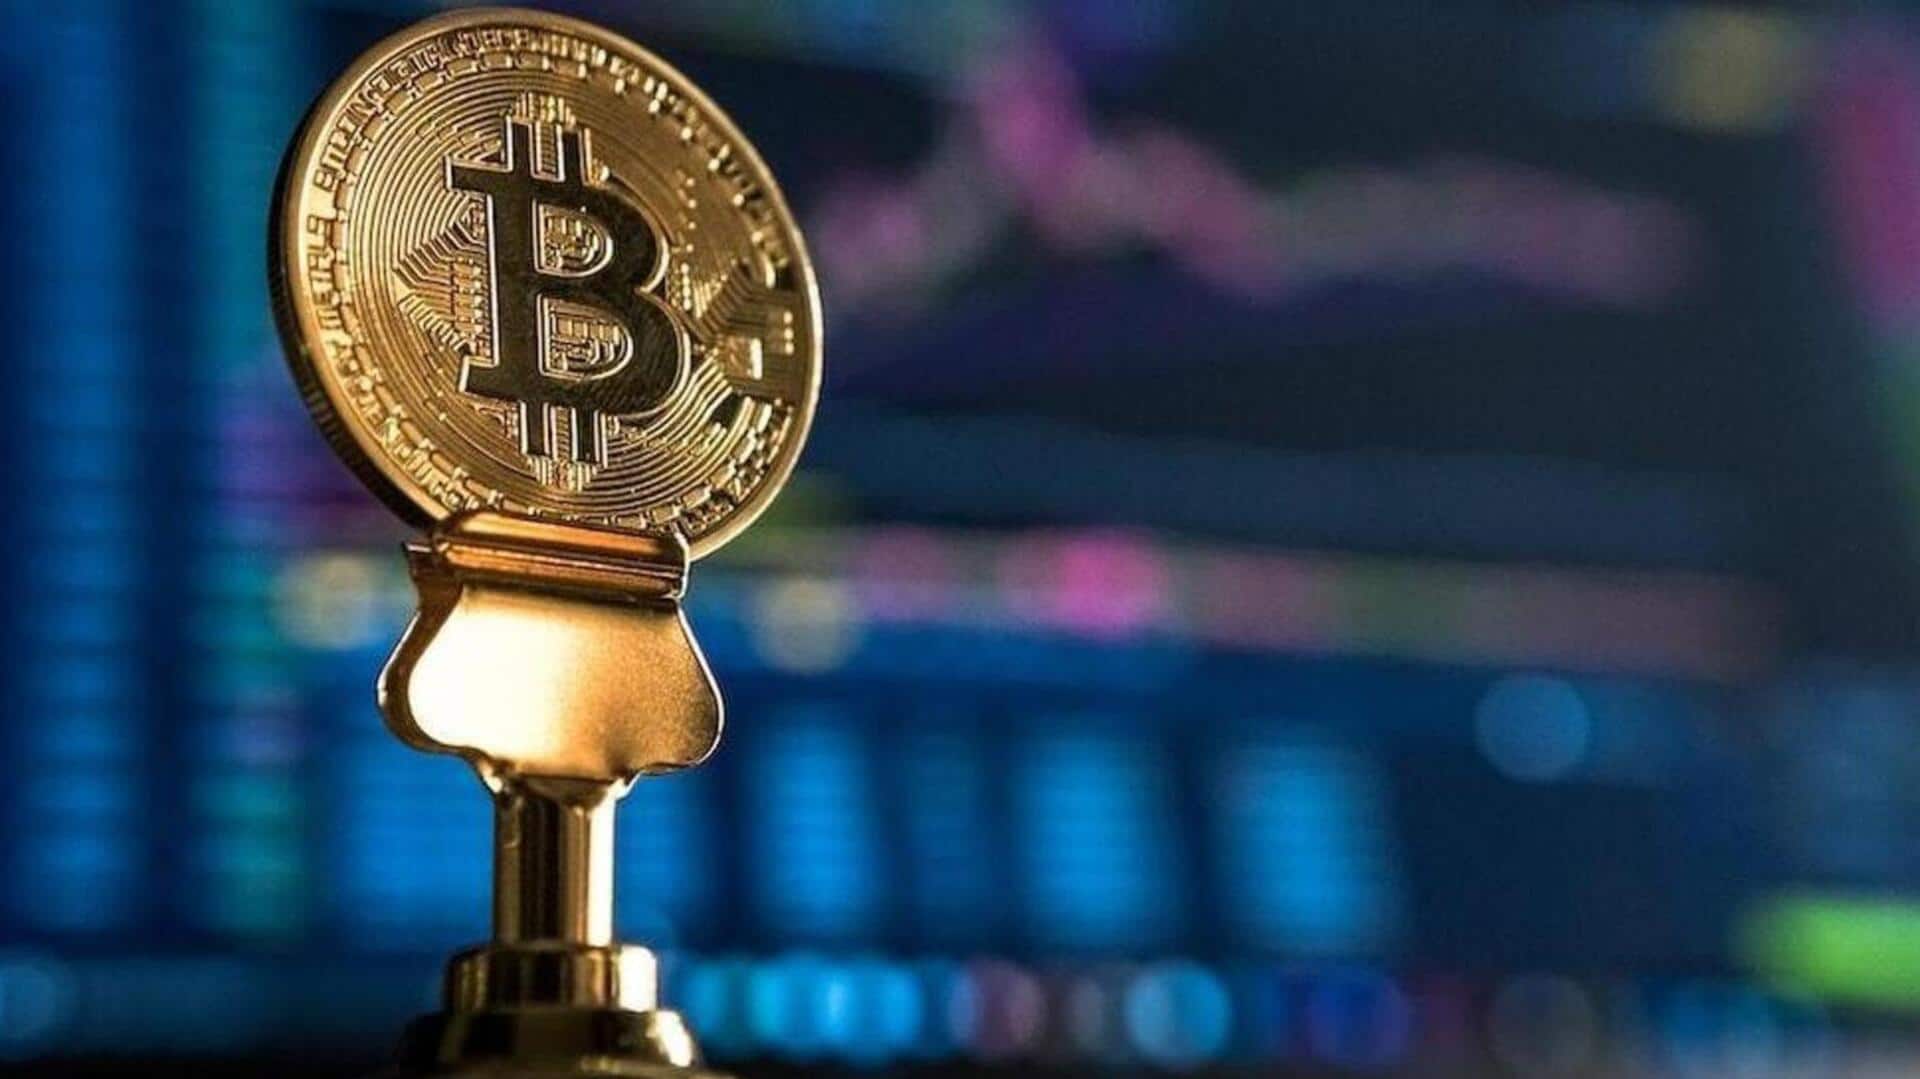 Today's cryptocurrency prices: Check rates of Bitcoin, Ethereum, Dogecoin, Tether